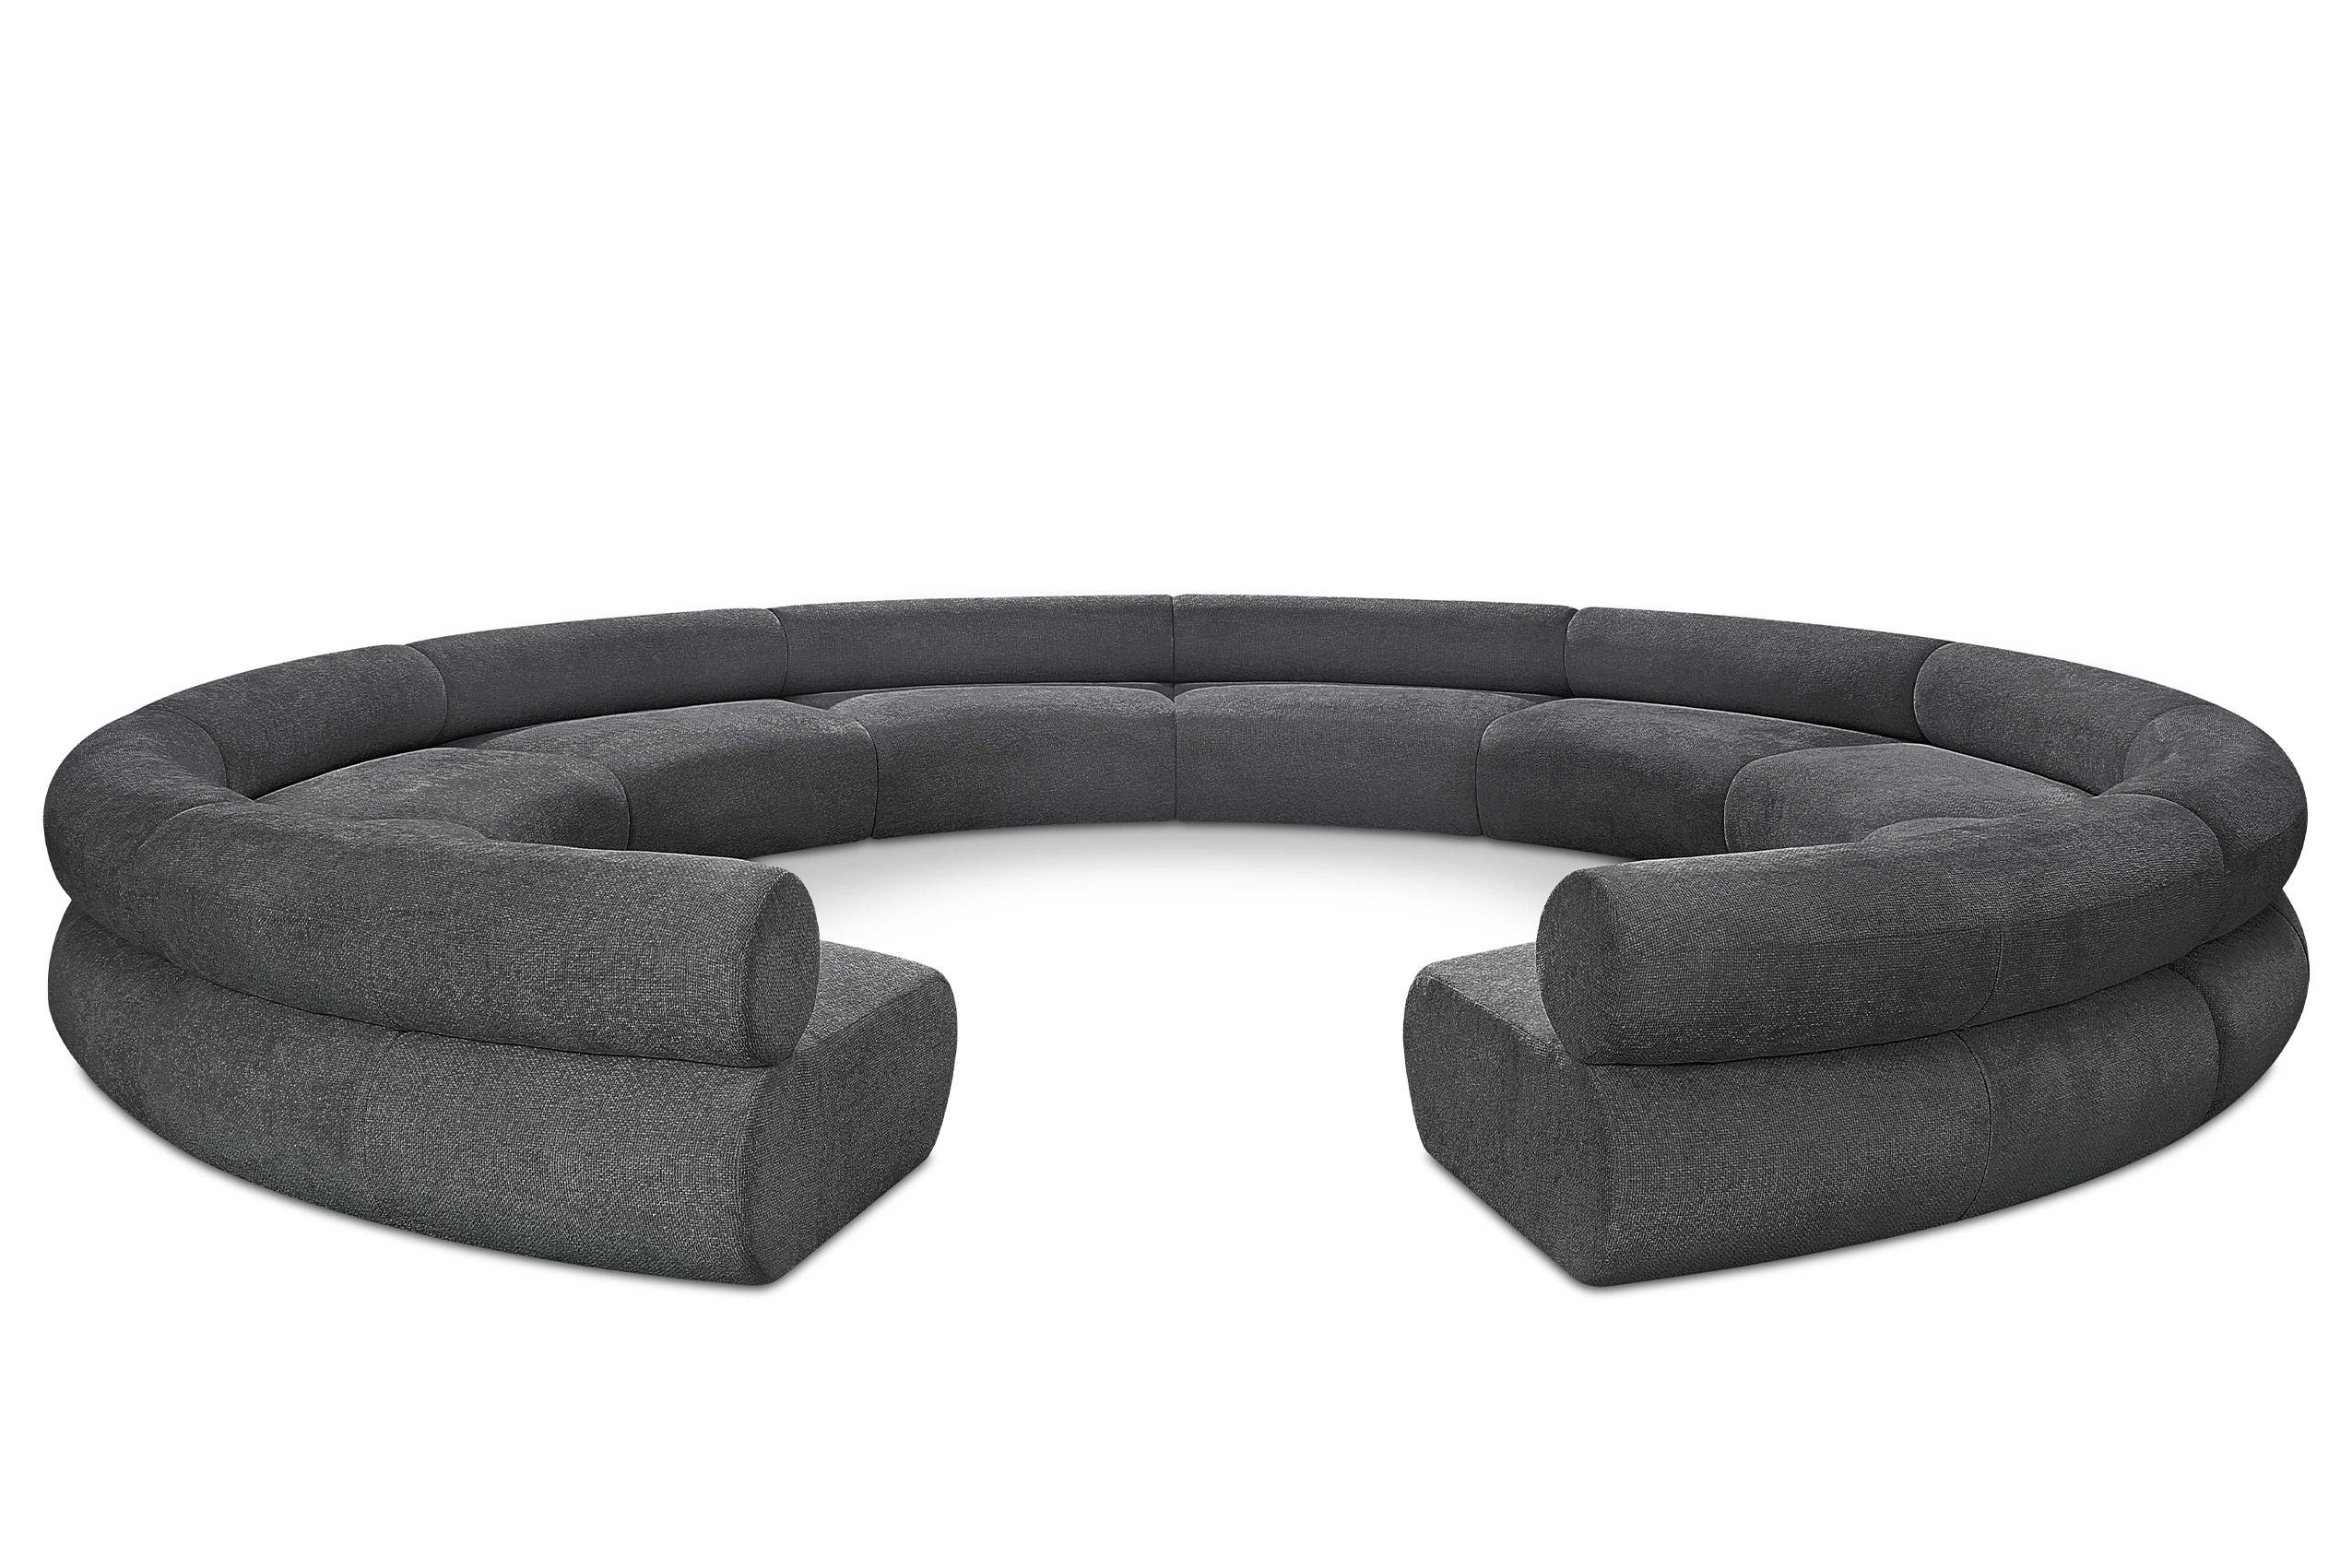 Contemporary, Modern Modular Sectional Sofa Bale 114Grey-S10A 114Grey-S10A in Charcoal Grey Chenille